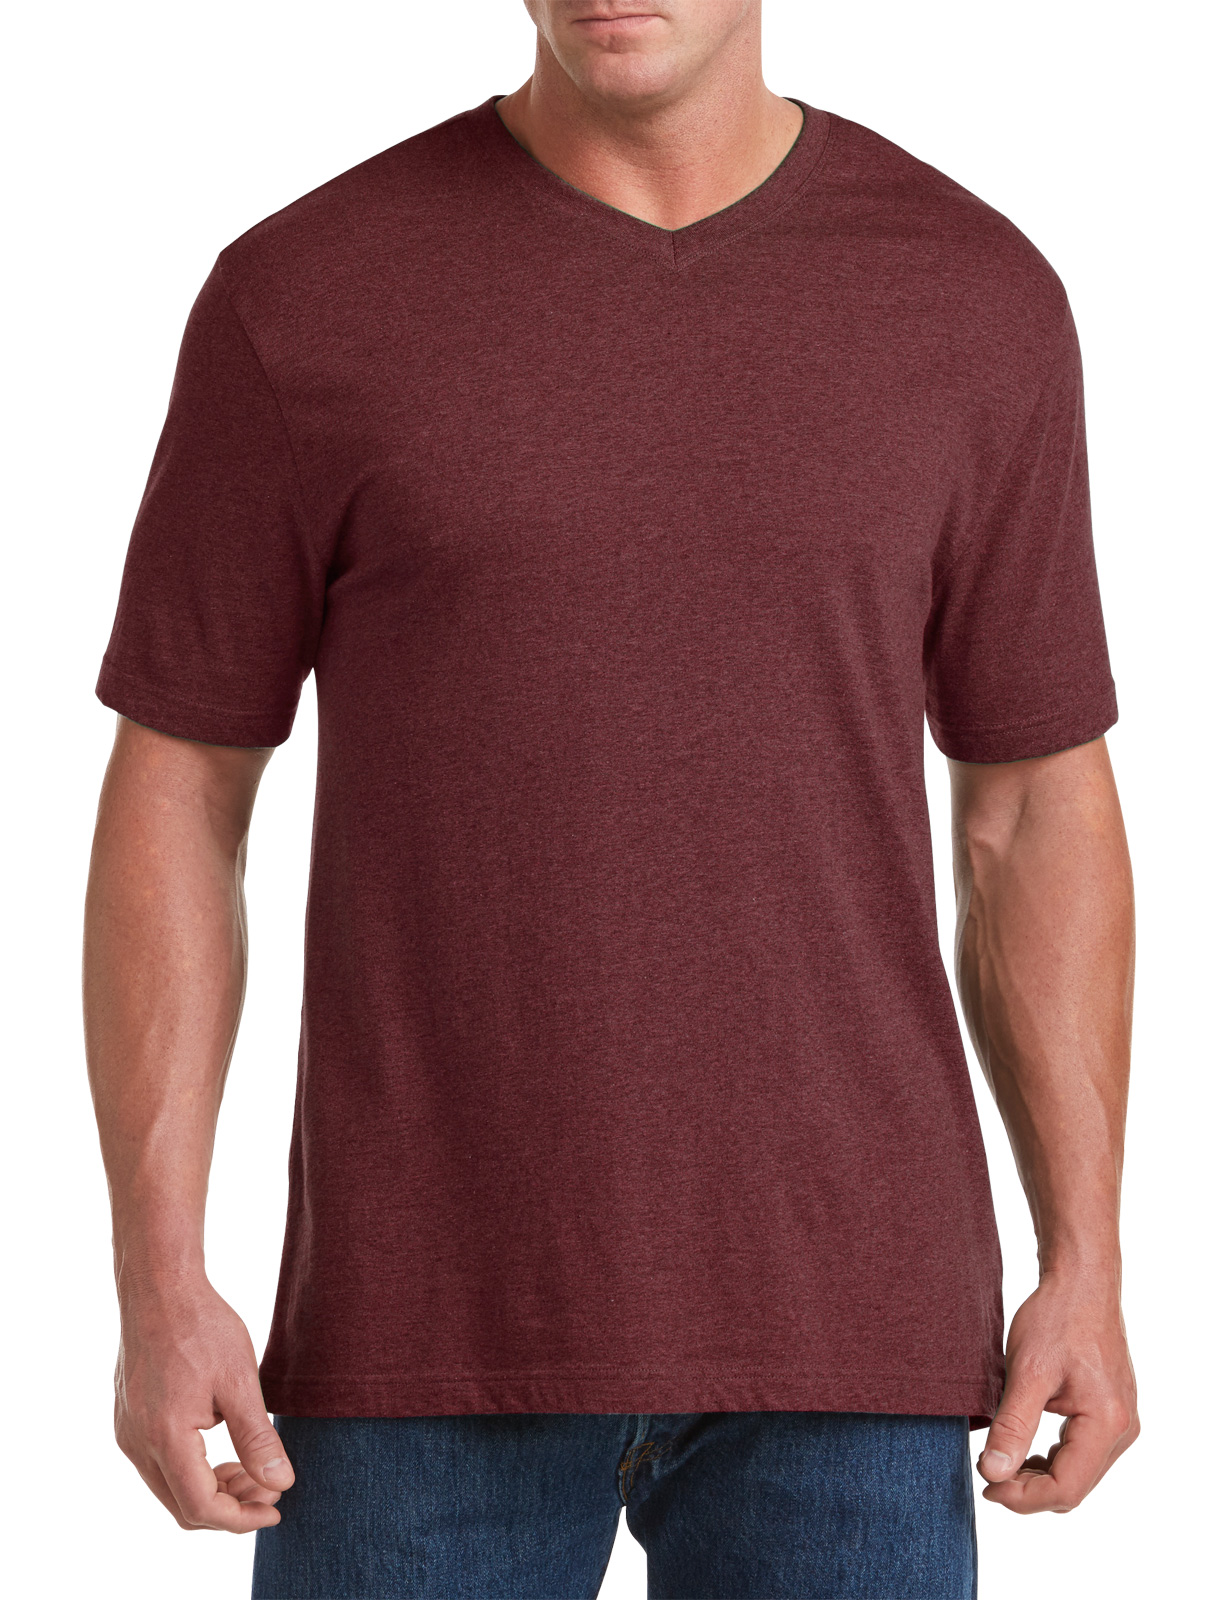 Harbor Bay Men's Big and Tall Wicking Jersey V-Neck Tee